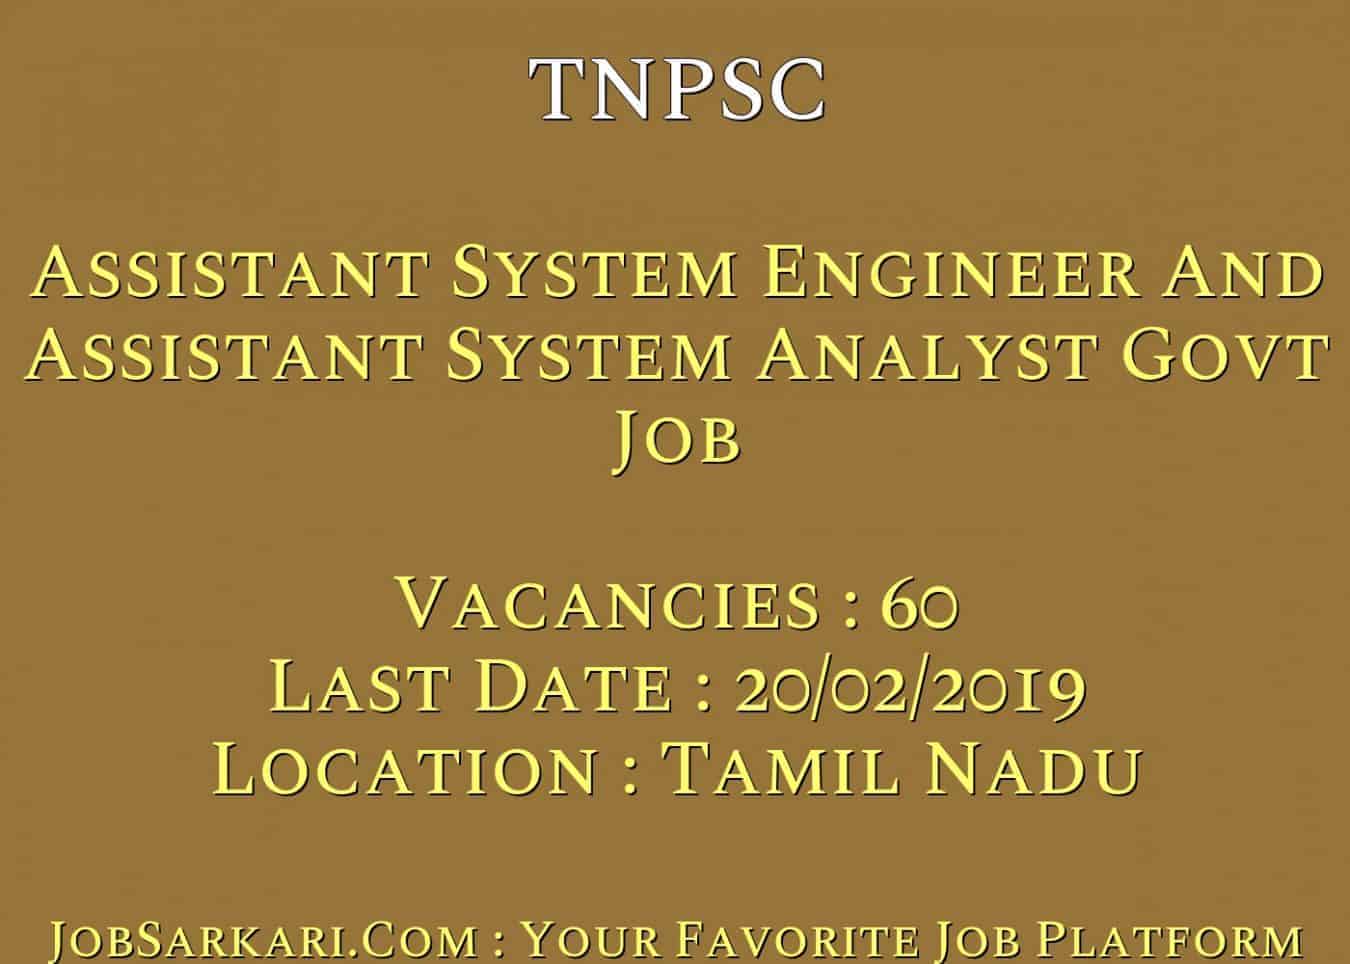 TNPSC Recruitment 2019 For Assistant System Engineer And Assistant System Analyst Govt Job